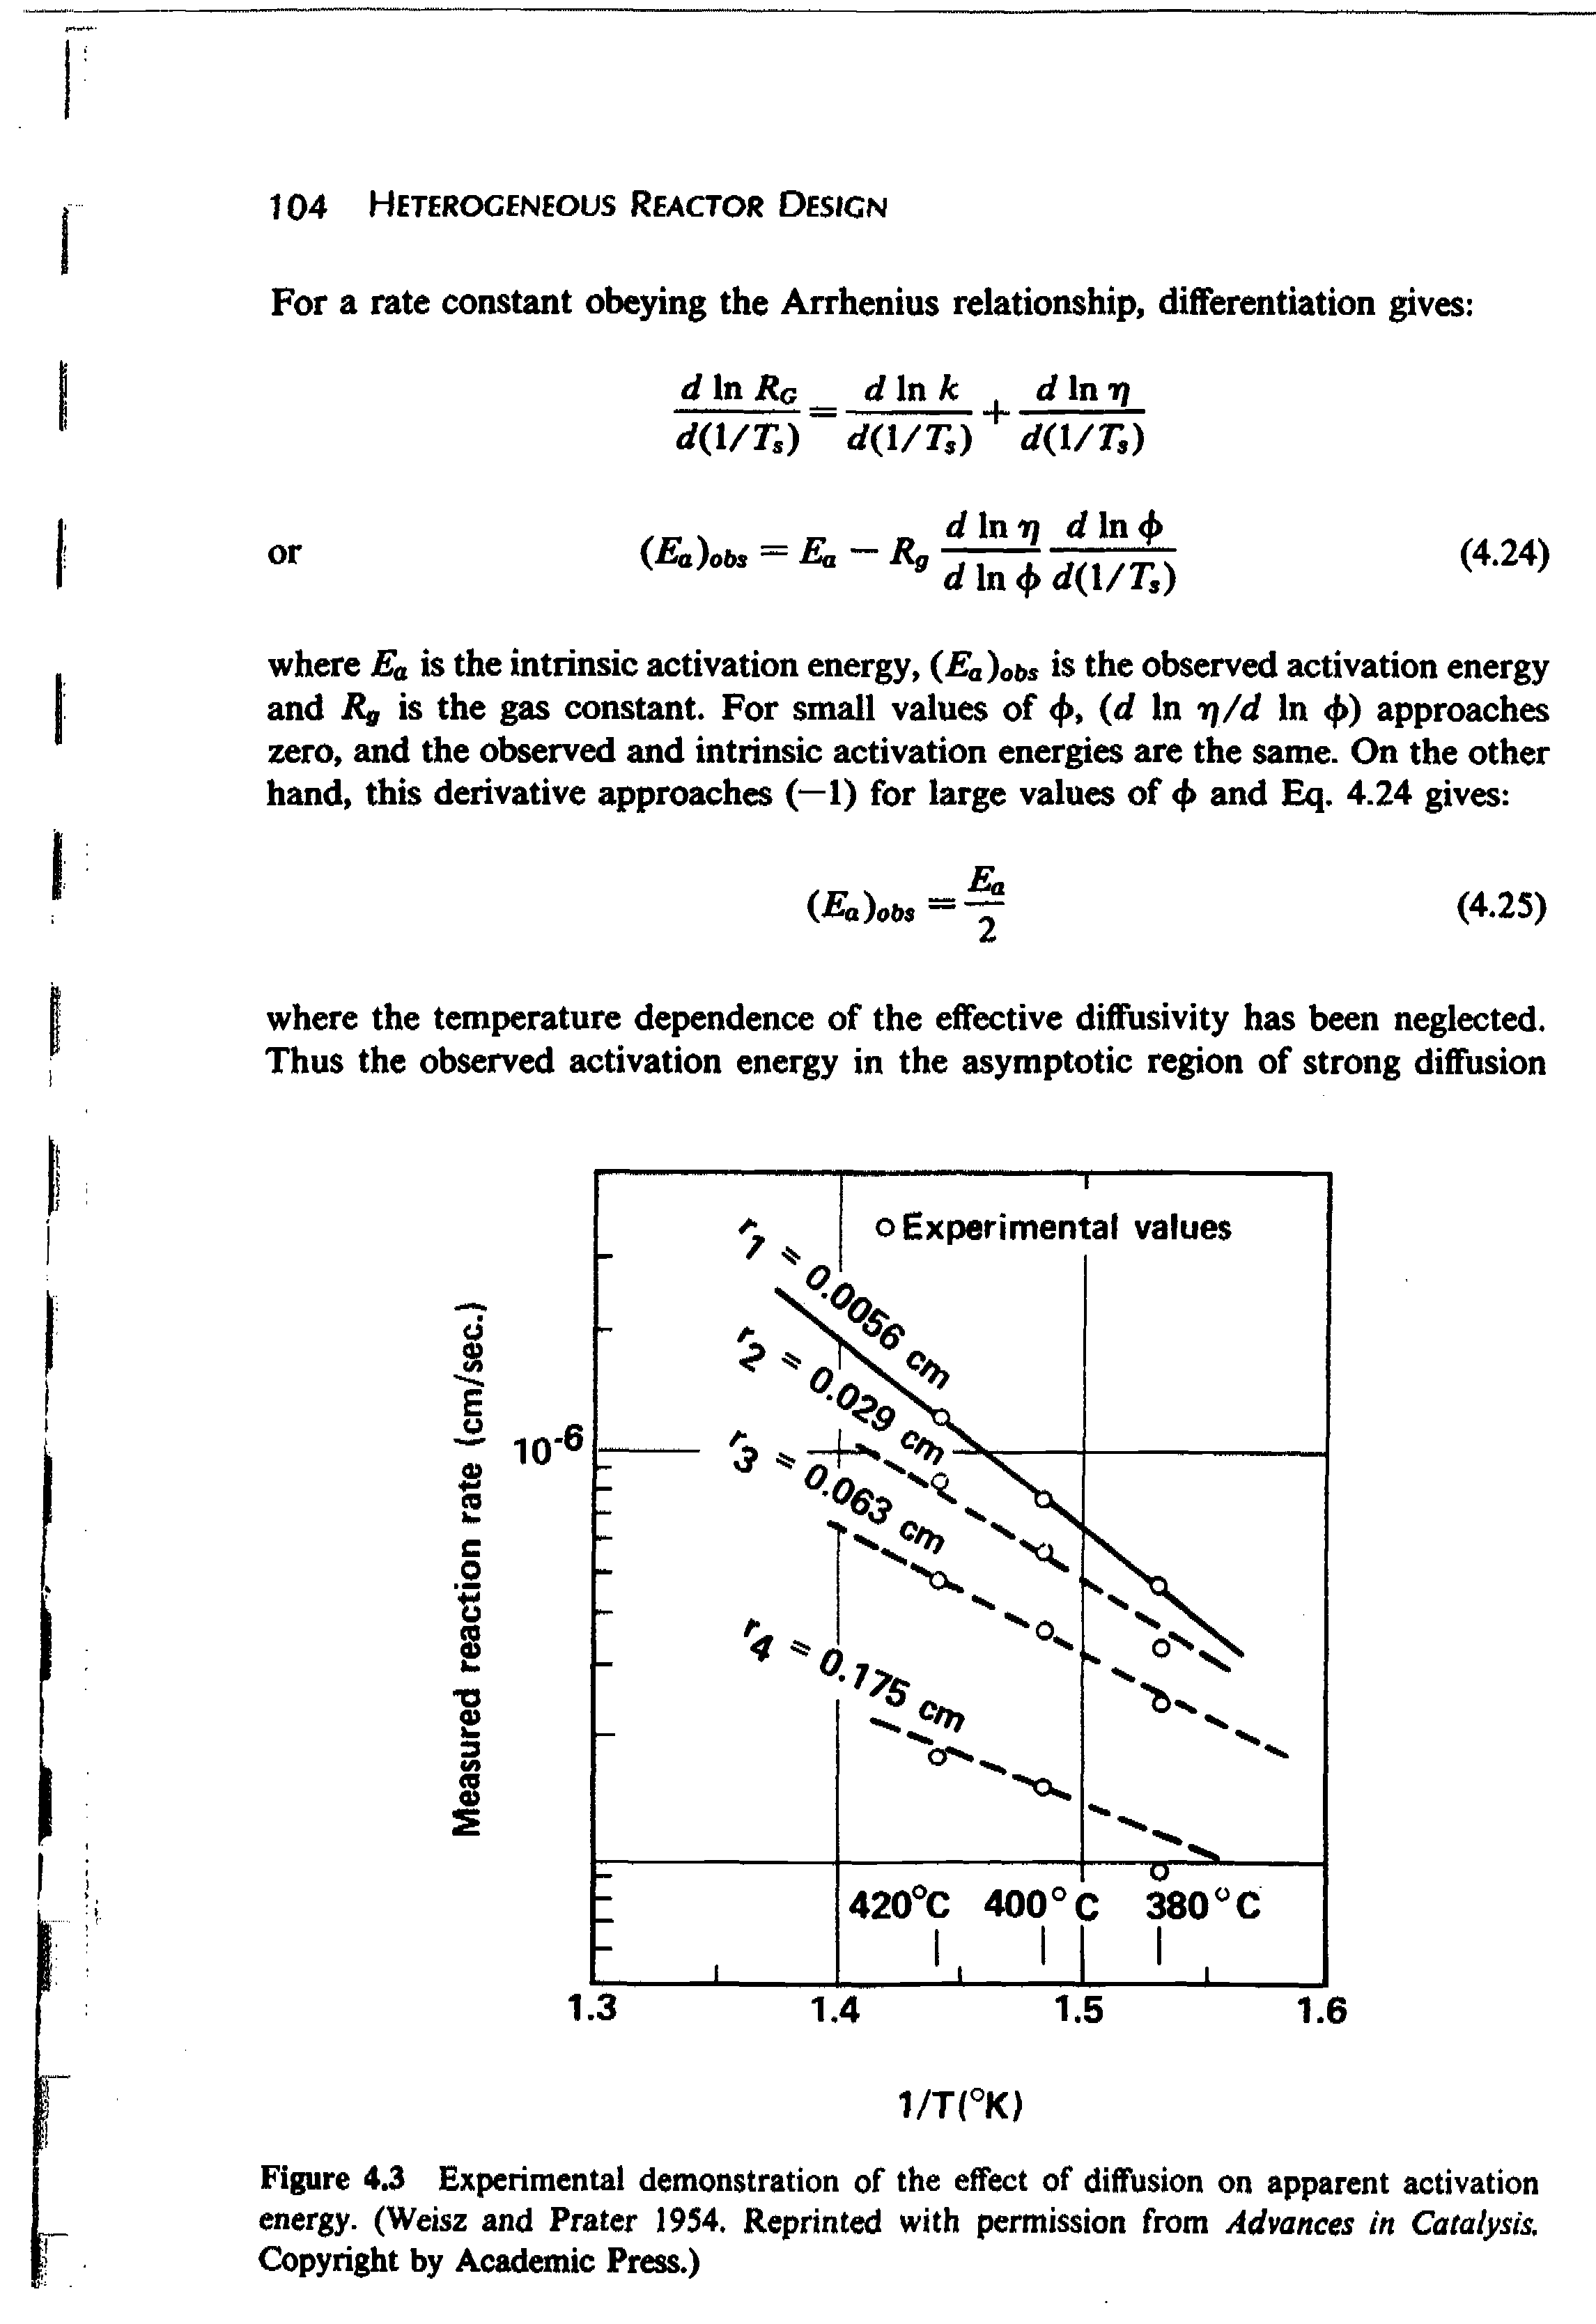 Figure 4.3 Experimental demonstration of the effect of diffusion on apparent activation energy. (Weisz and Prater 1954. Reprinted with permission from Advances in Catalysis, Copyright by Academic Press.)...